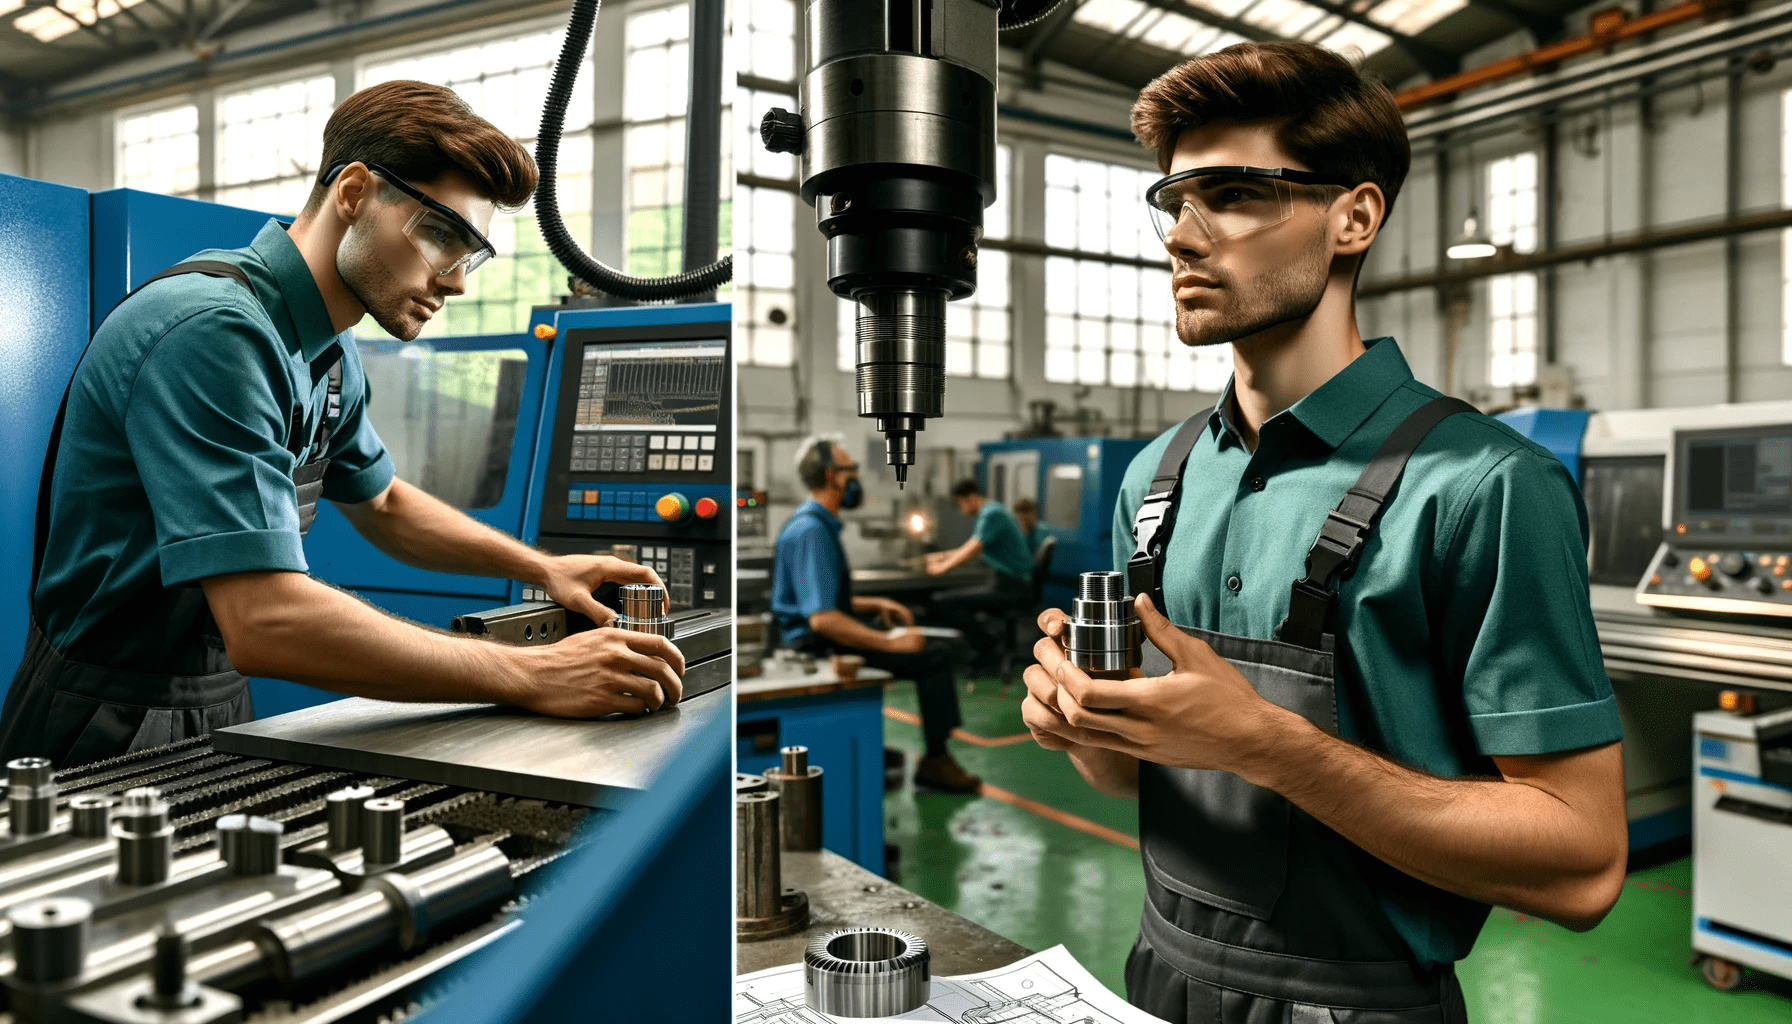 Caucasian male CNC machinist, with short brown hair, wearing safety goggles and a blue work shirt, operating a CNC machine in a well-lit industri